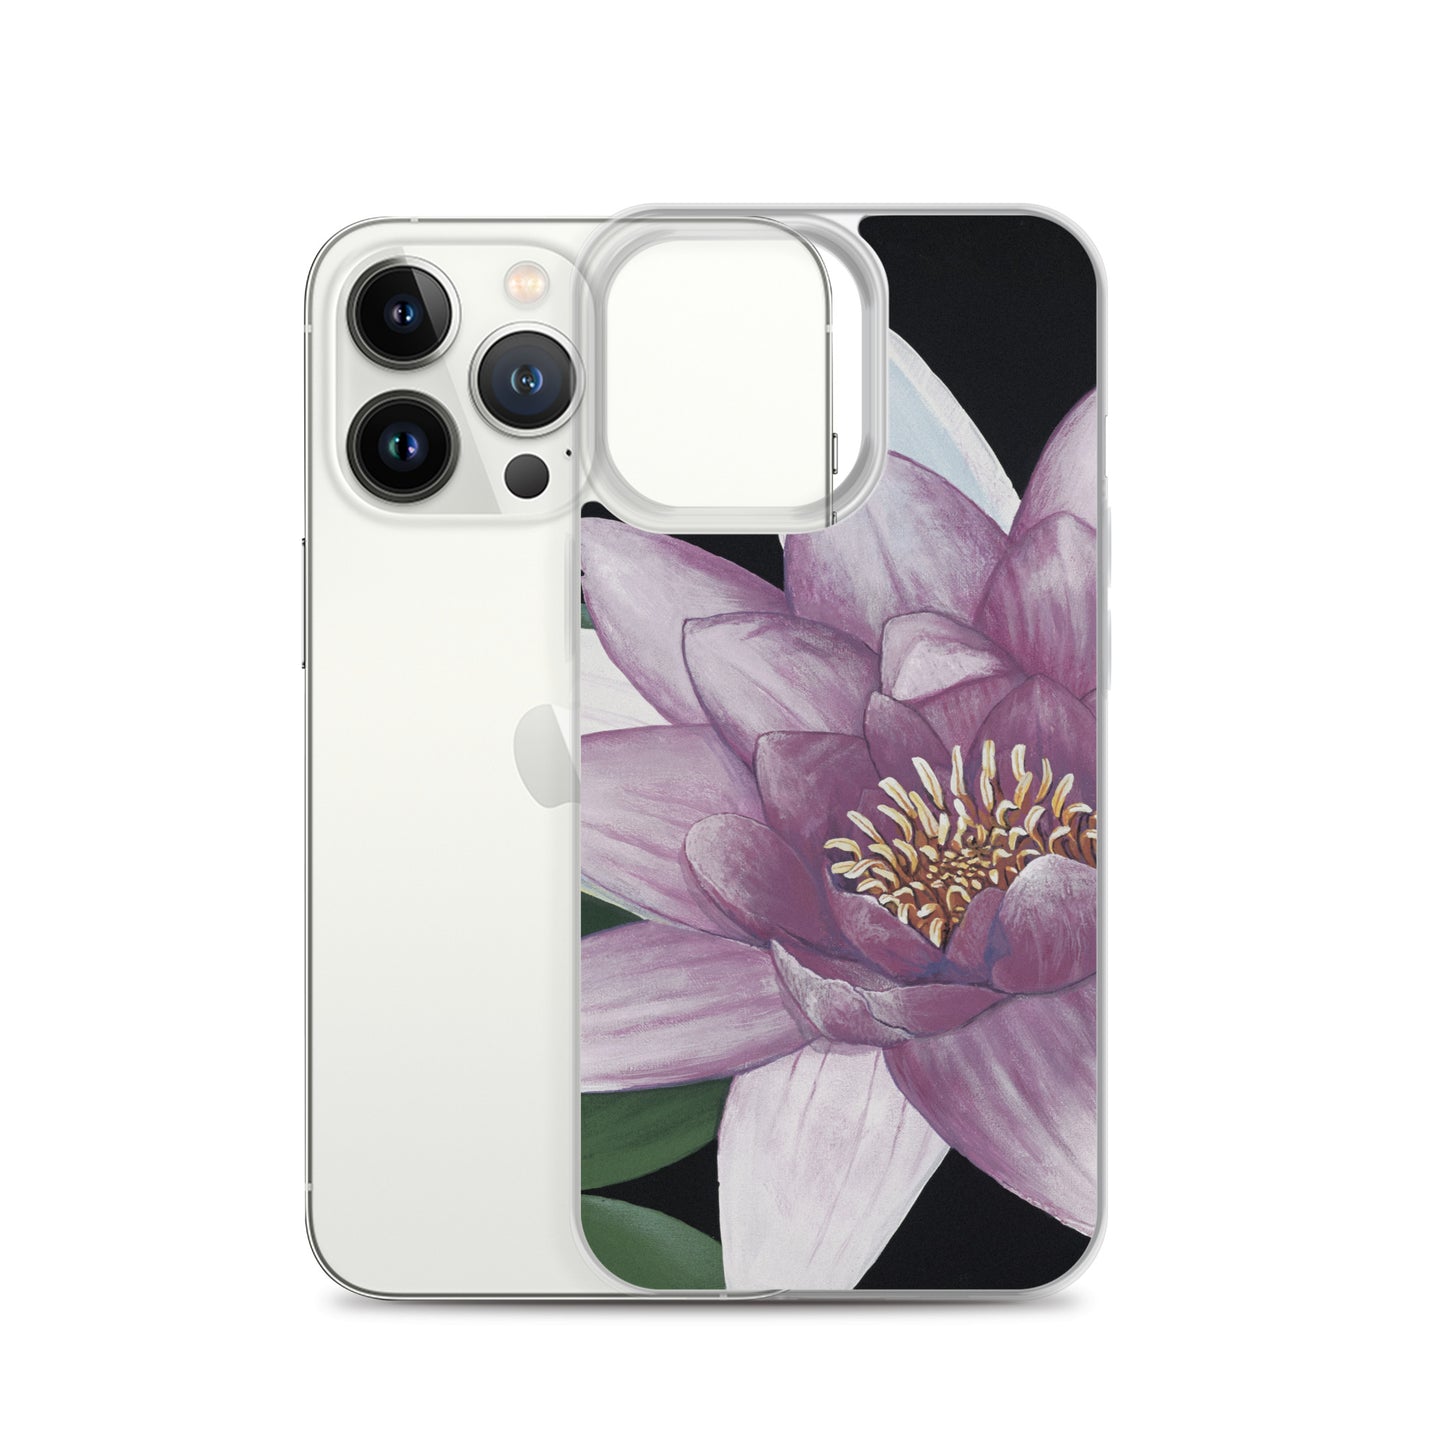 "Lotus Bloomed" iPhone Case